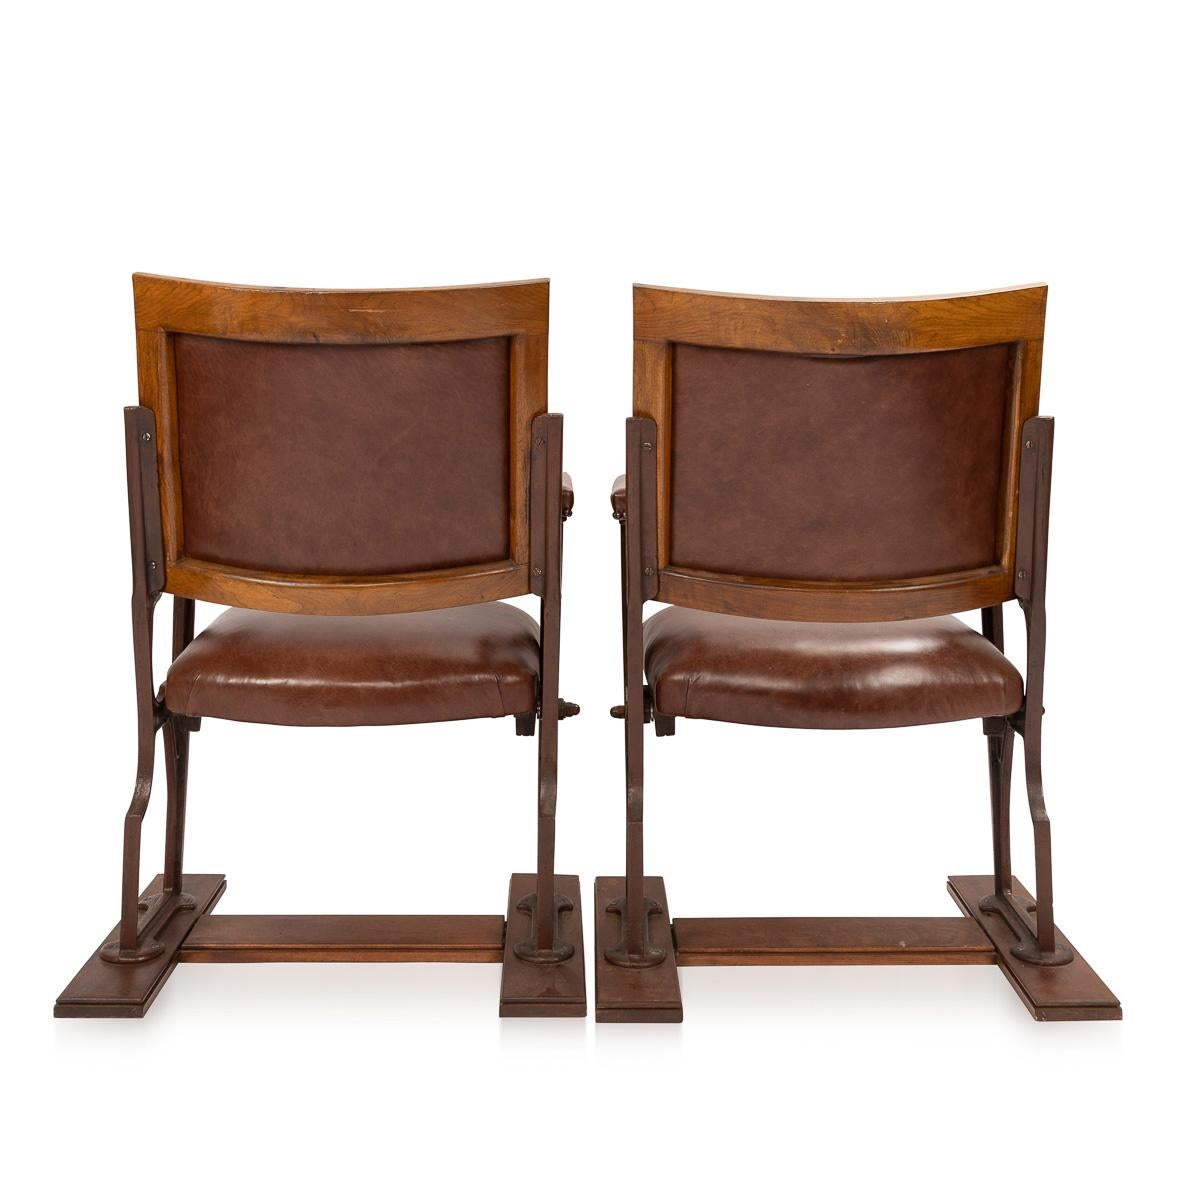 20th Century Edwardian Mahogany and Leather Cinema / Theatre Chairs, circa 1900 In Good Condition For Sale In Royal Tunbridge Wells, Kent